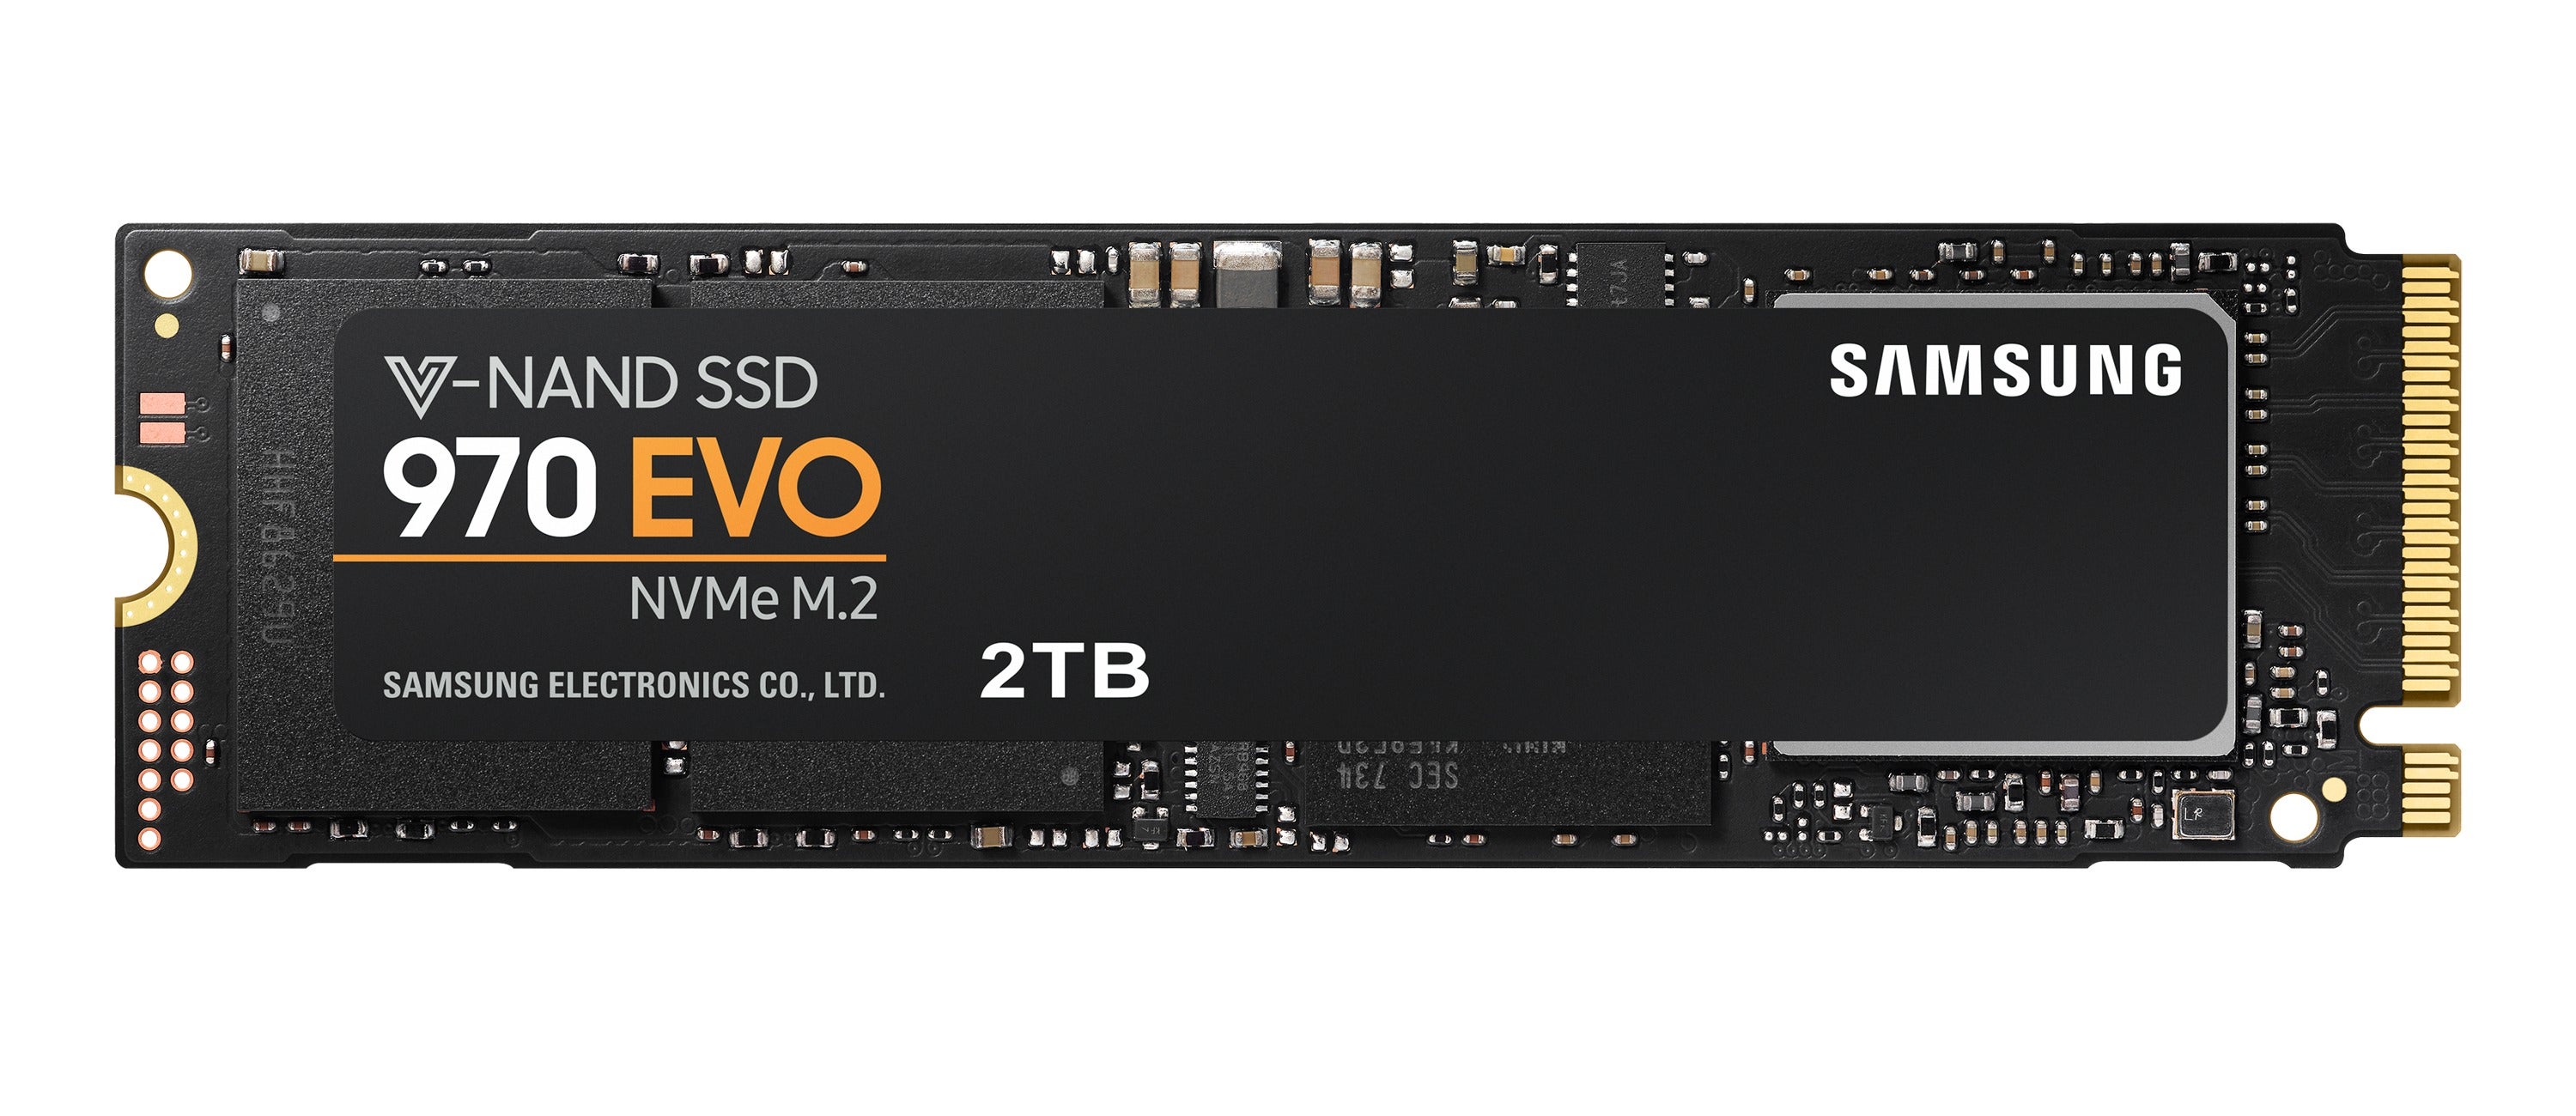 Samsung 970 EVO Plus review: Samsung's entry-level NVMe SSD is 